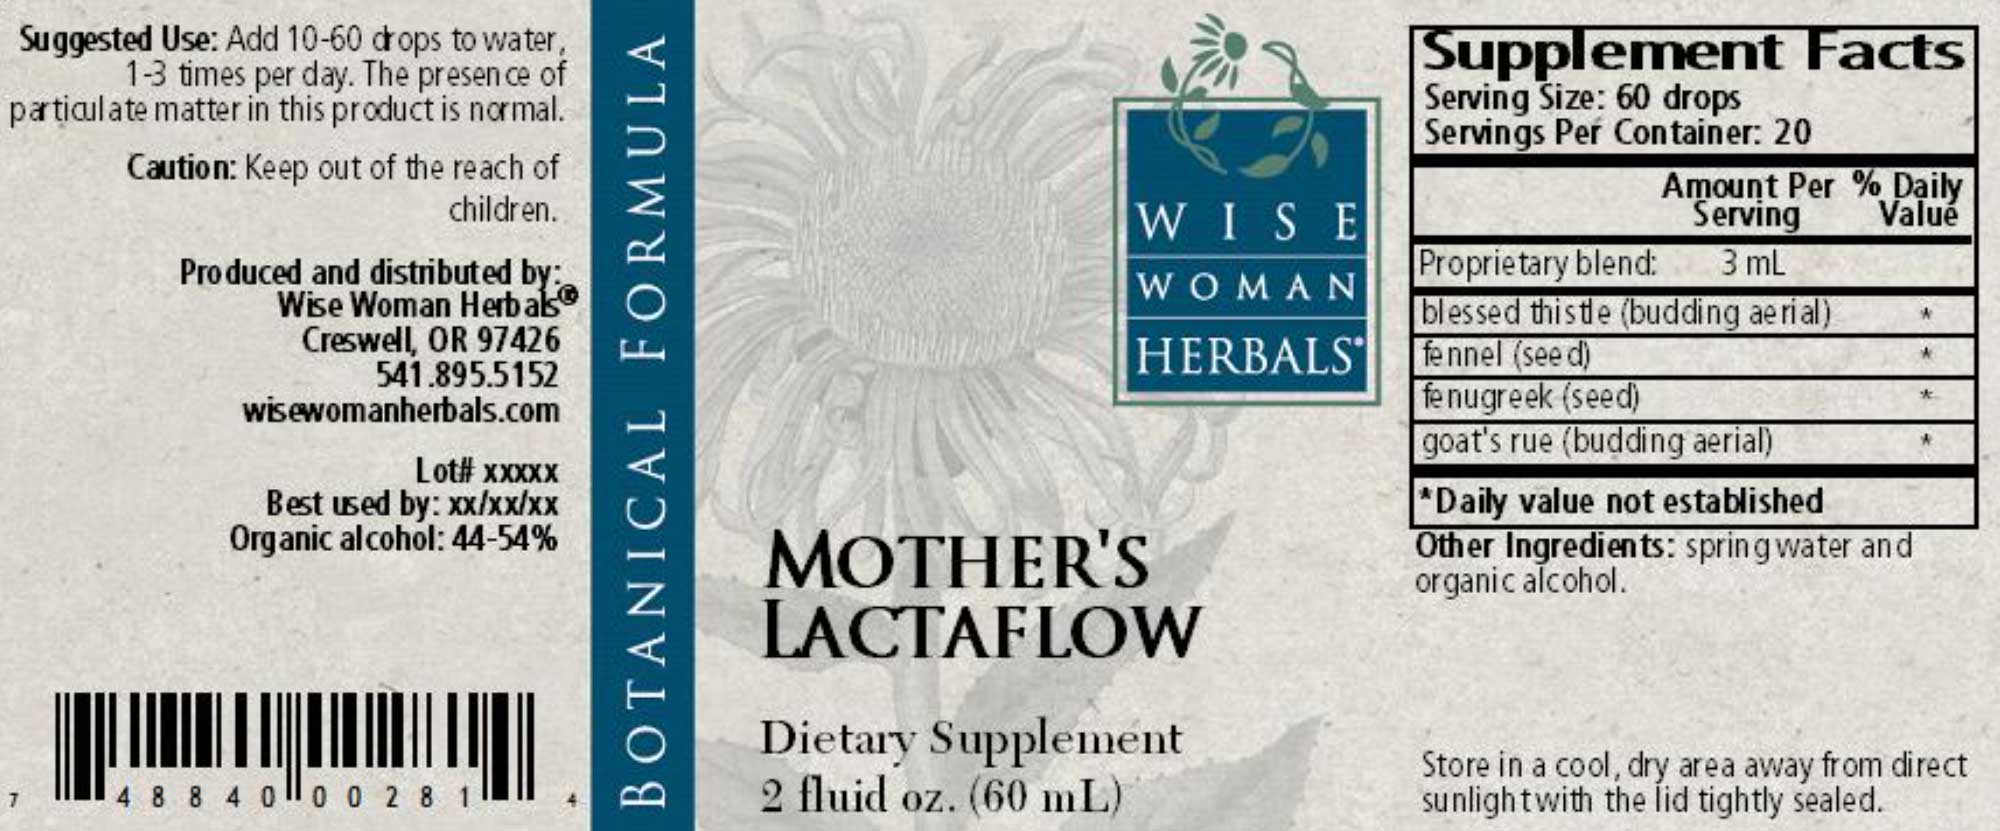 Wise Woman Herbals Mothers Lactaflow Label